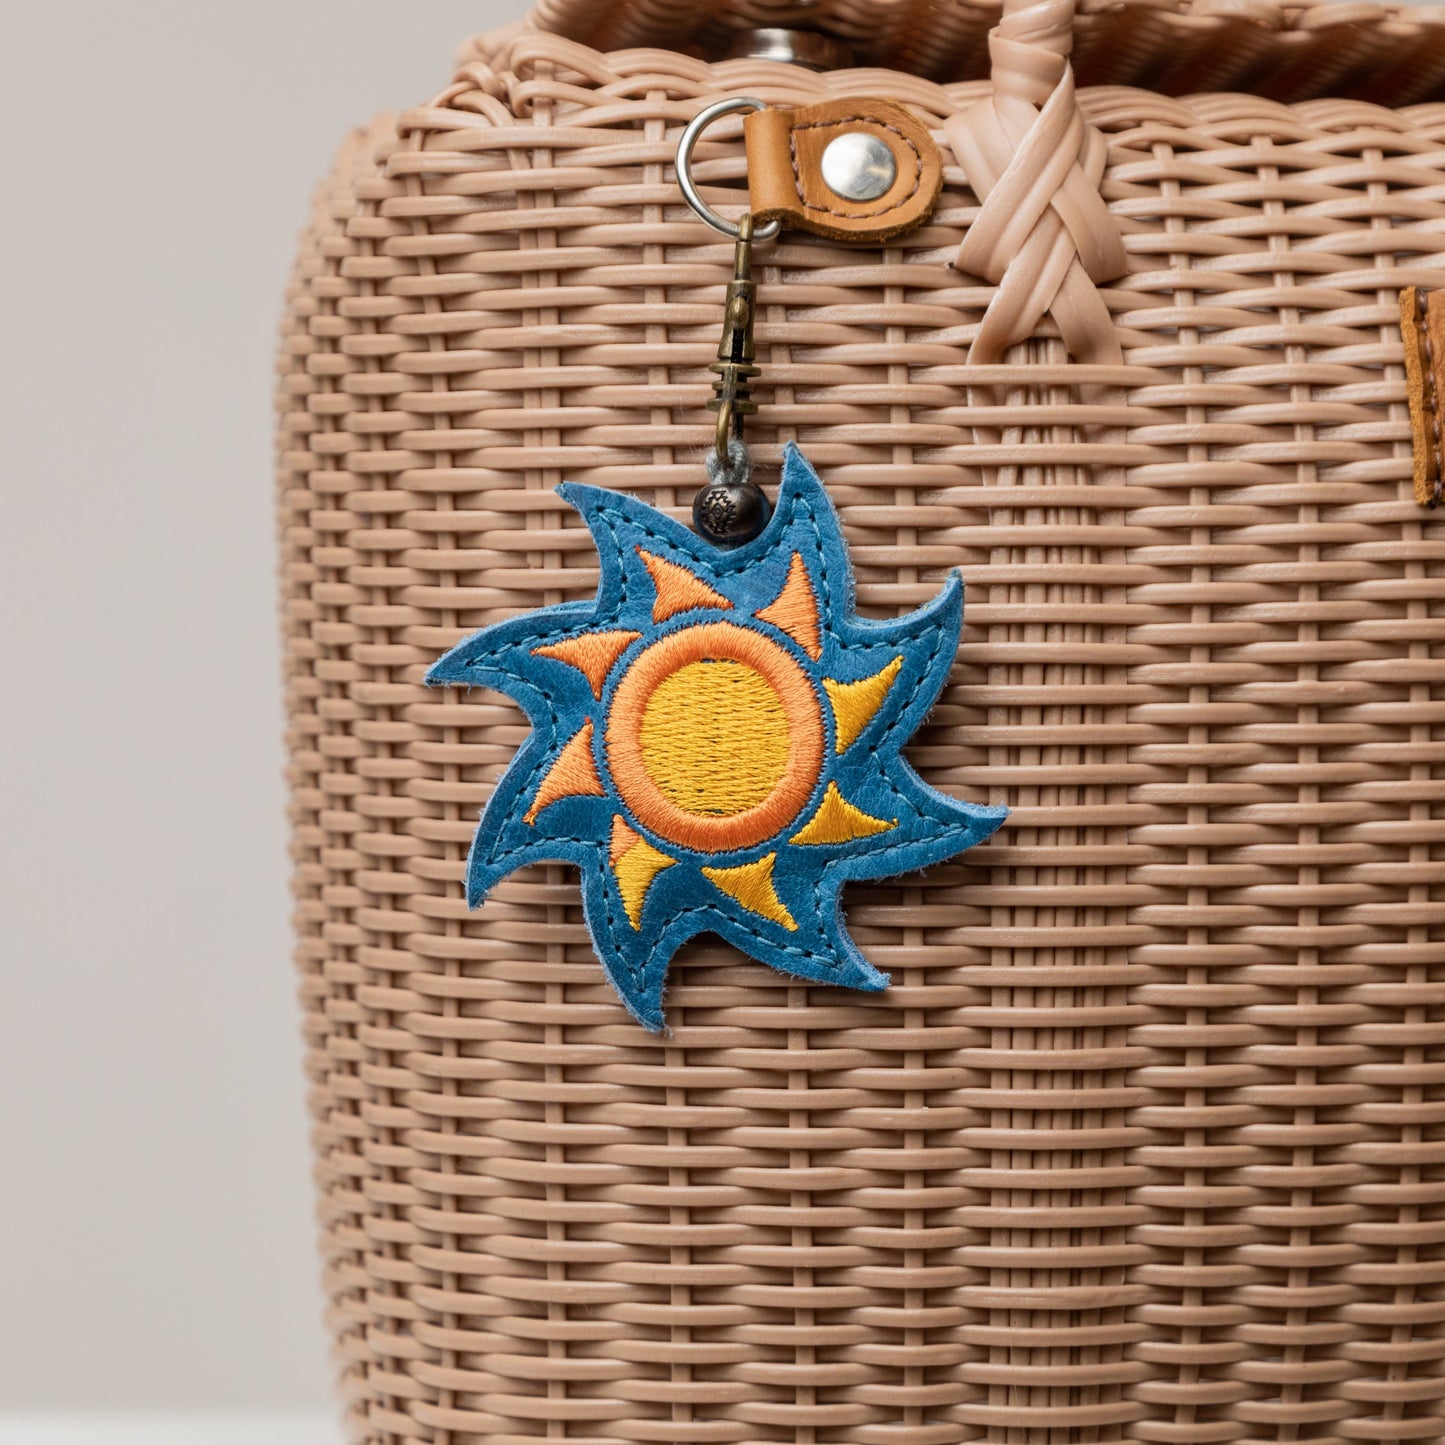 EMBROIDERED SUN CHARM - LEATHER CHARM WITH TASSEL